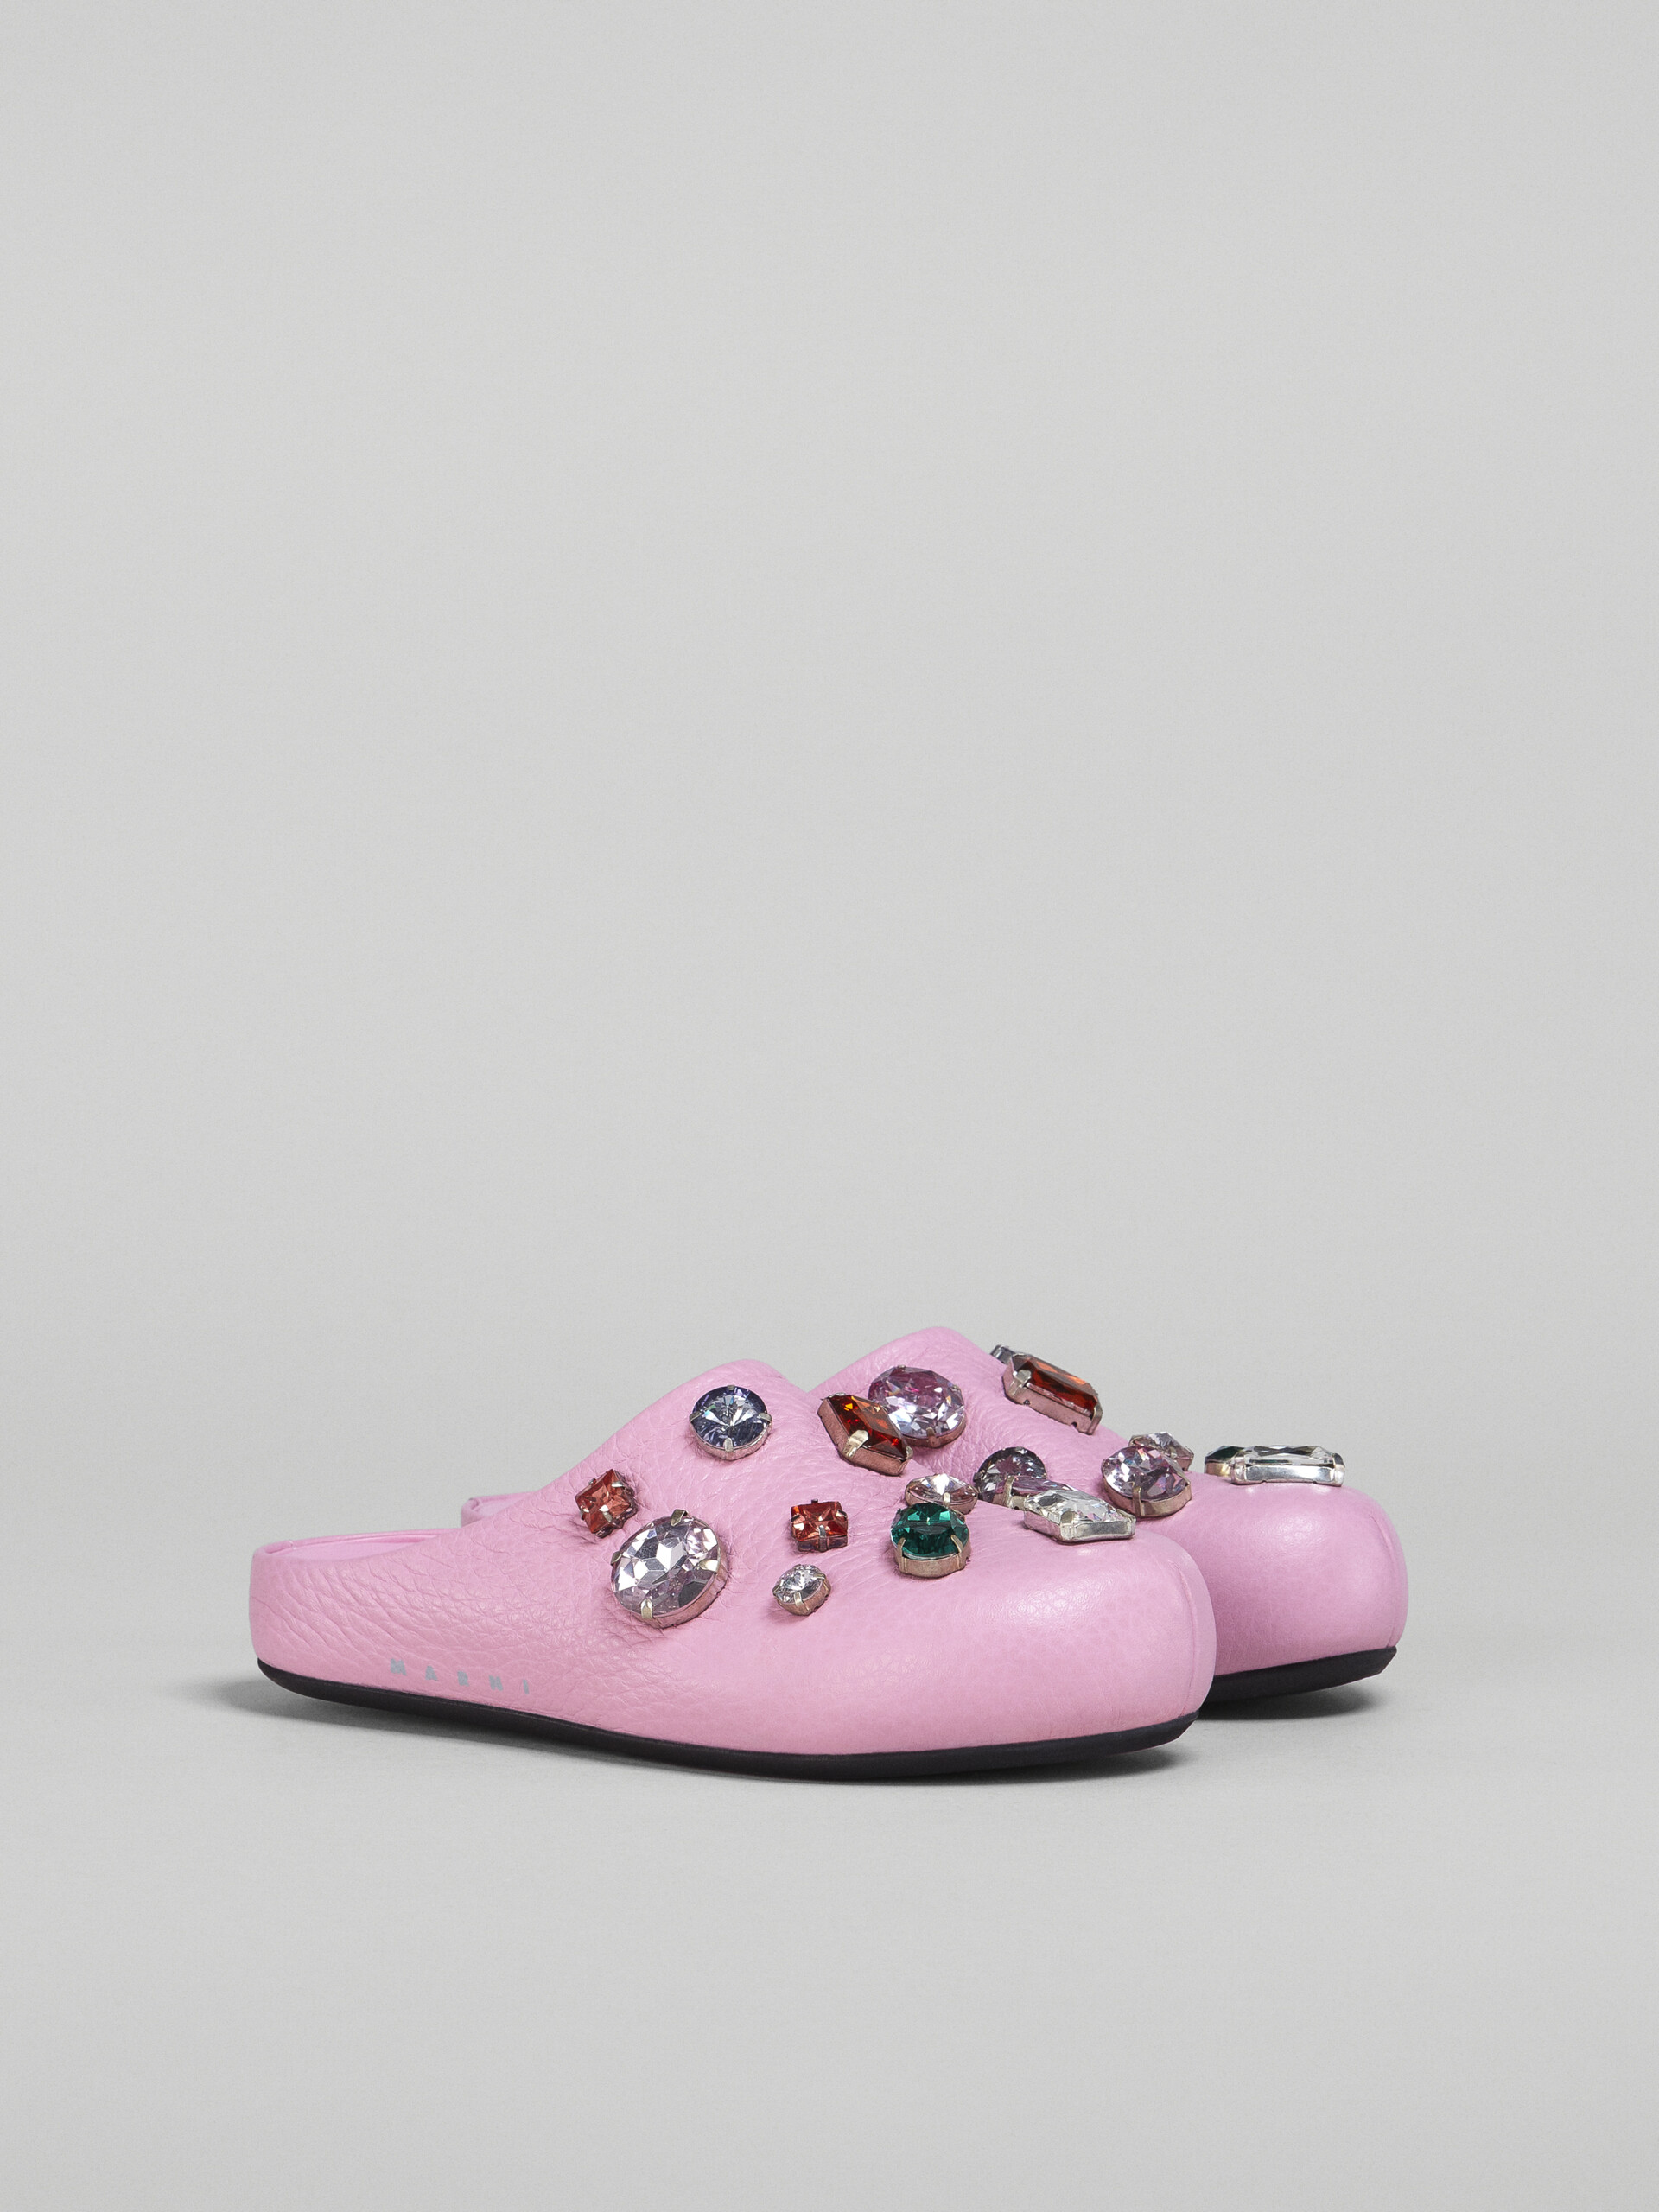 Pink leather Fussbett sabot with glass beads - Clogs - Image 2